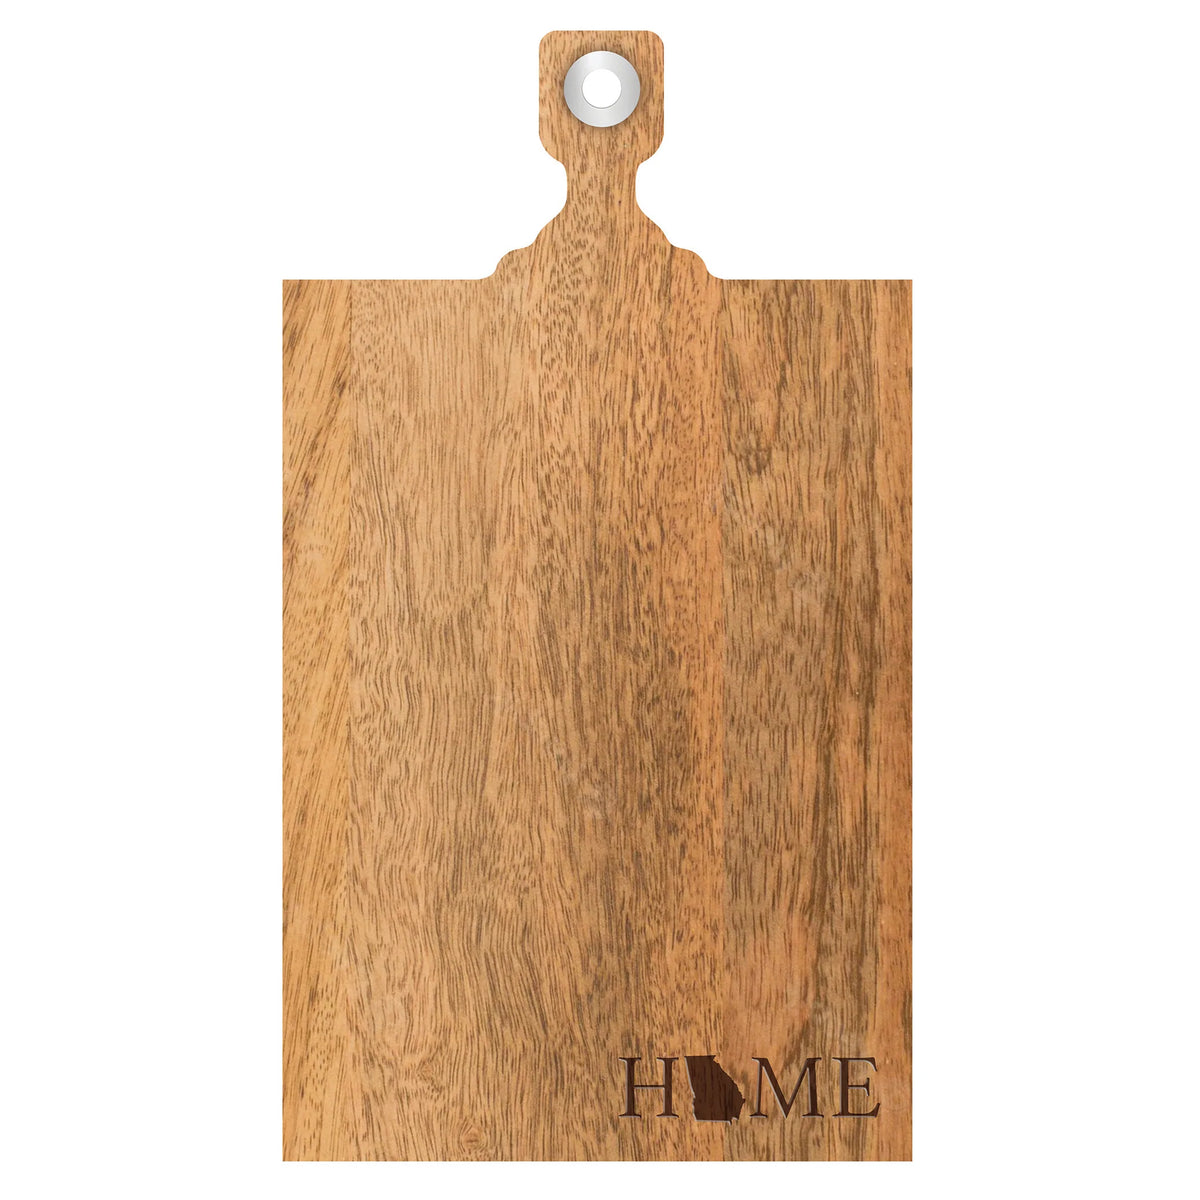 Home State Design / Paddle Serving Board